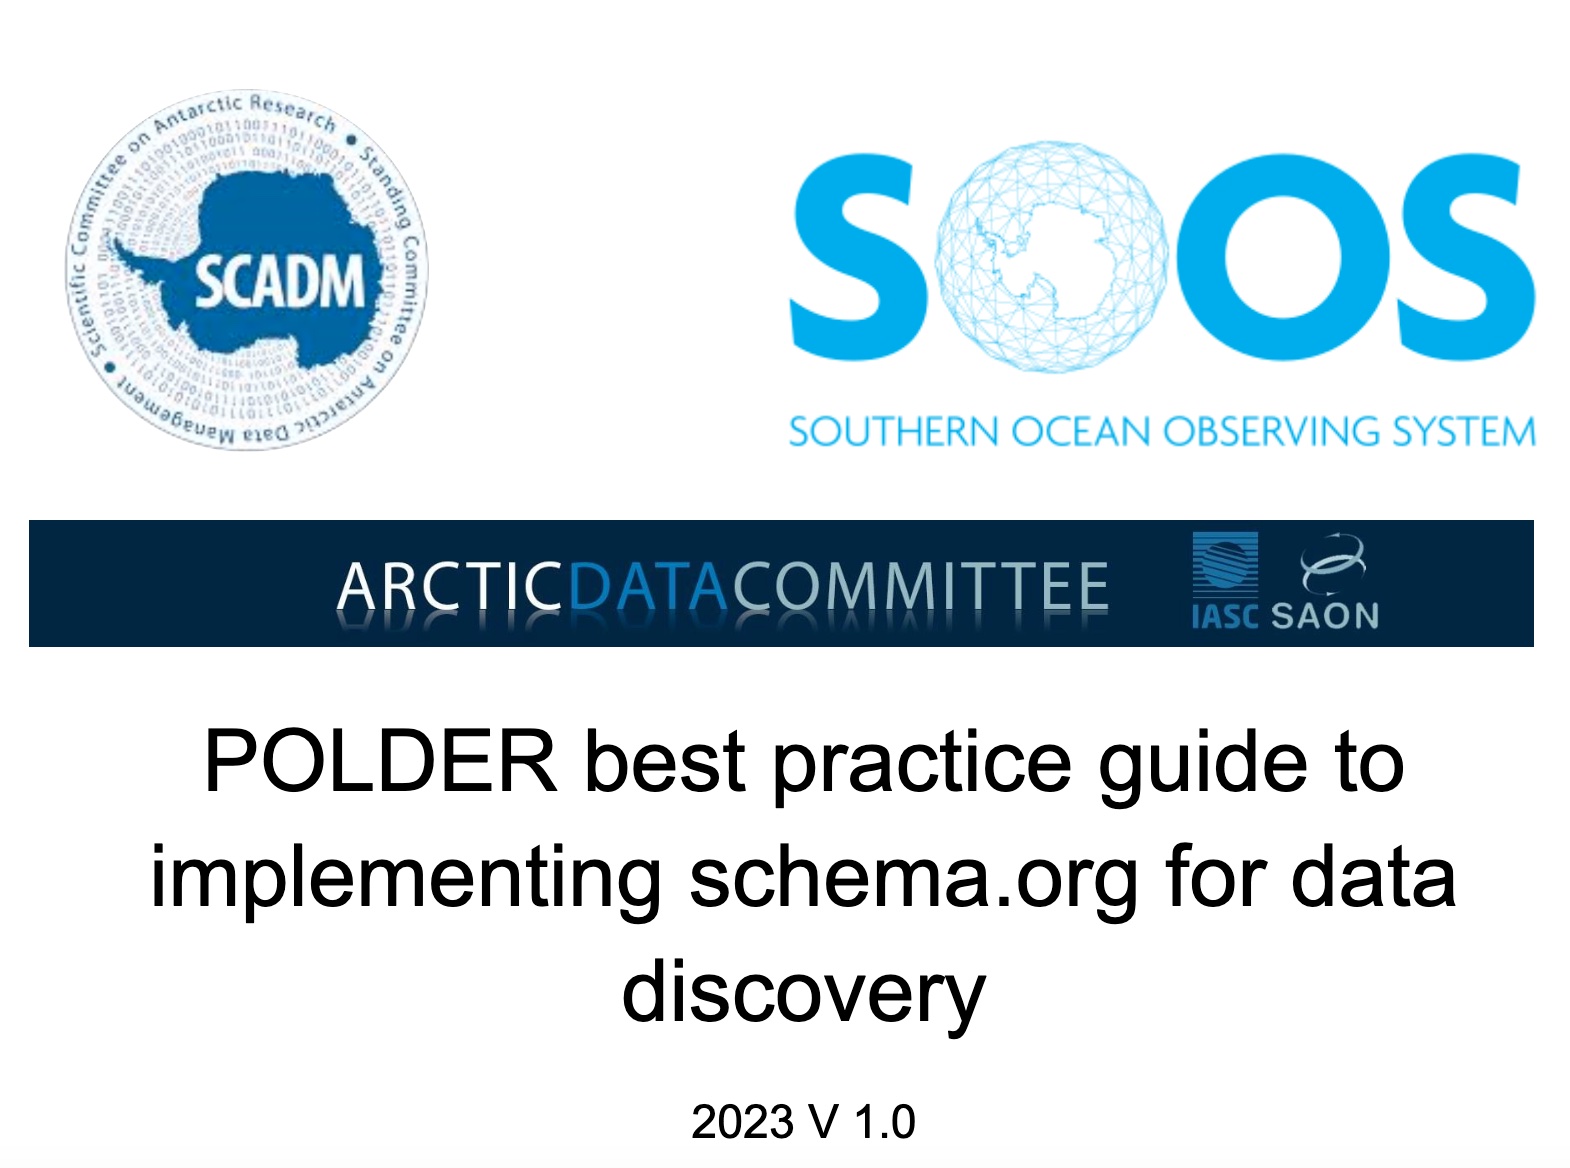 Logos for the Scientific Committee for Antarctic Research, the Southern Ocean Observing System, and the Arctic Data Committee, with the title of this guide.